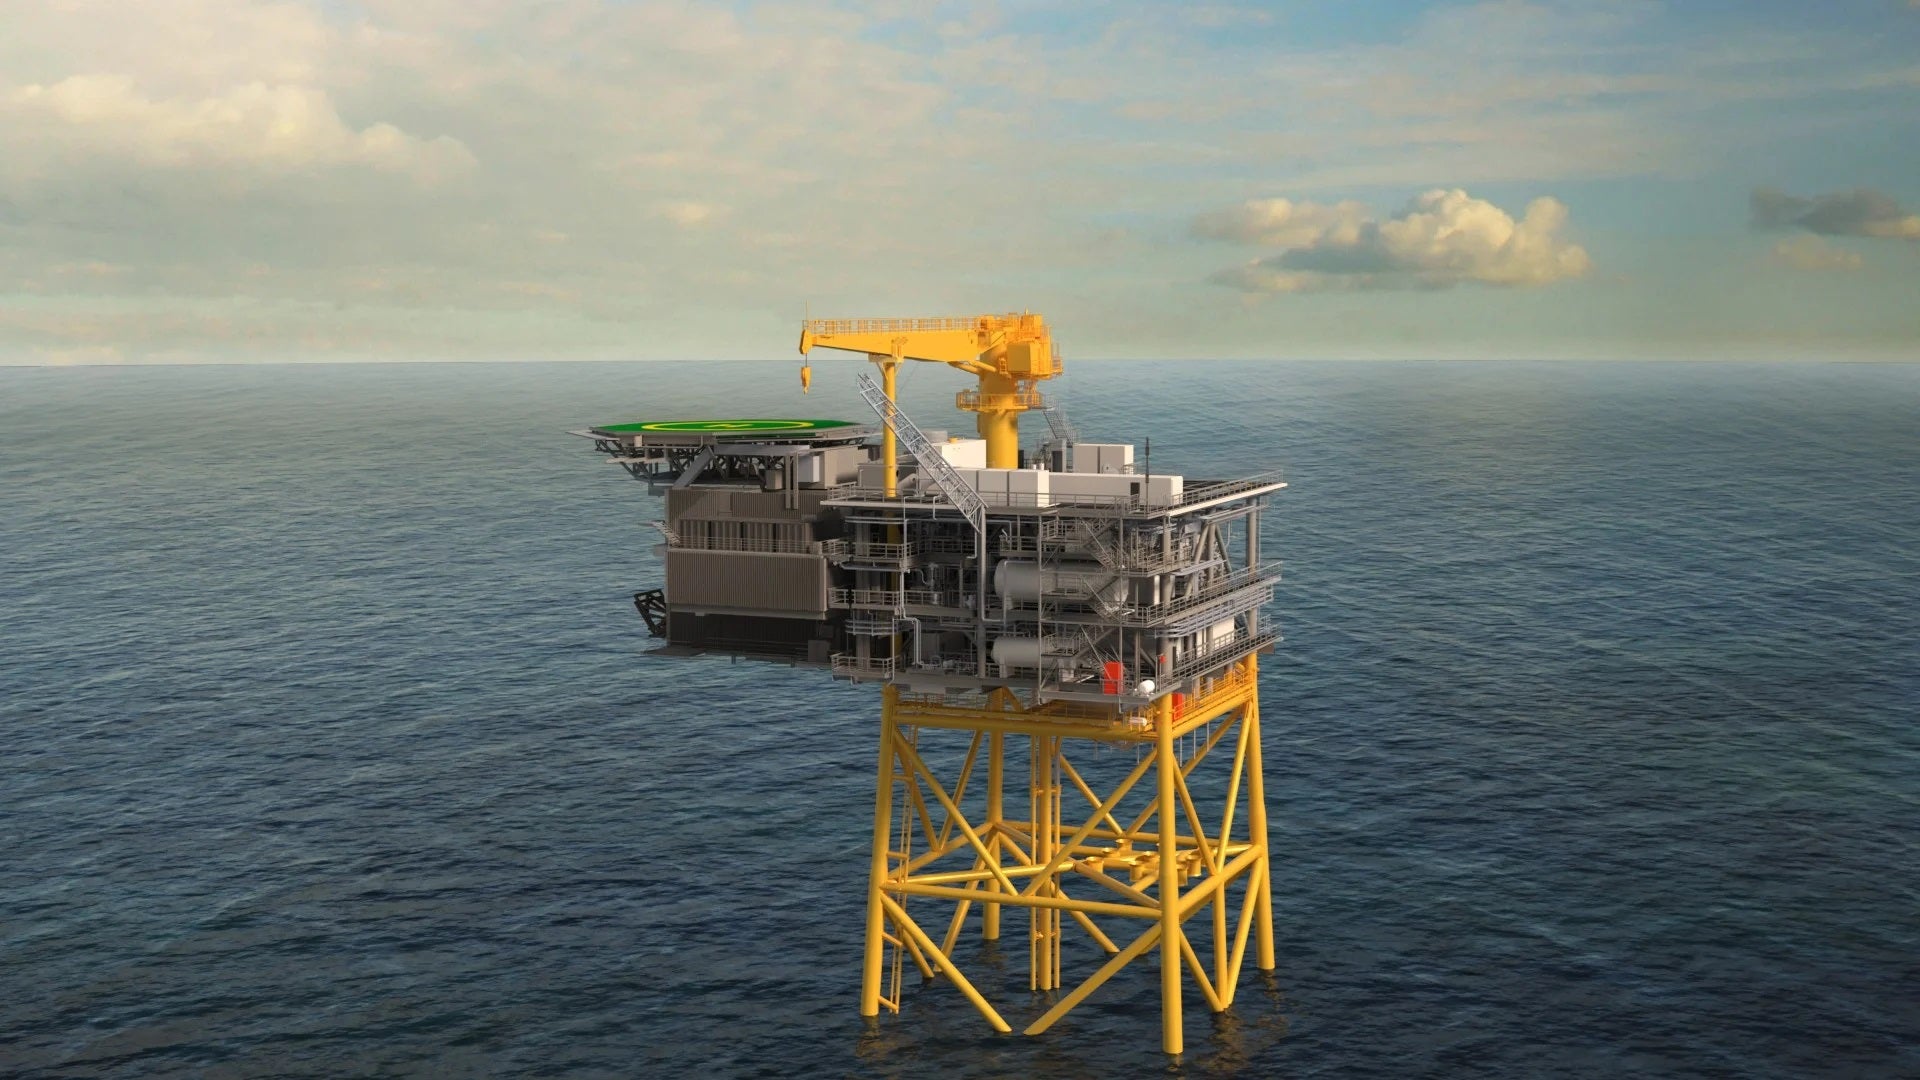 Aker Solutions to deliver wellhead platform for Shell's UK North Sea field